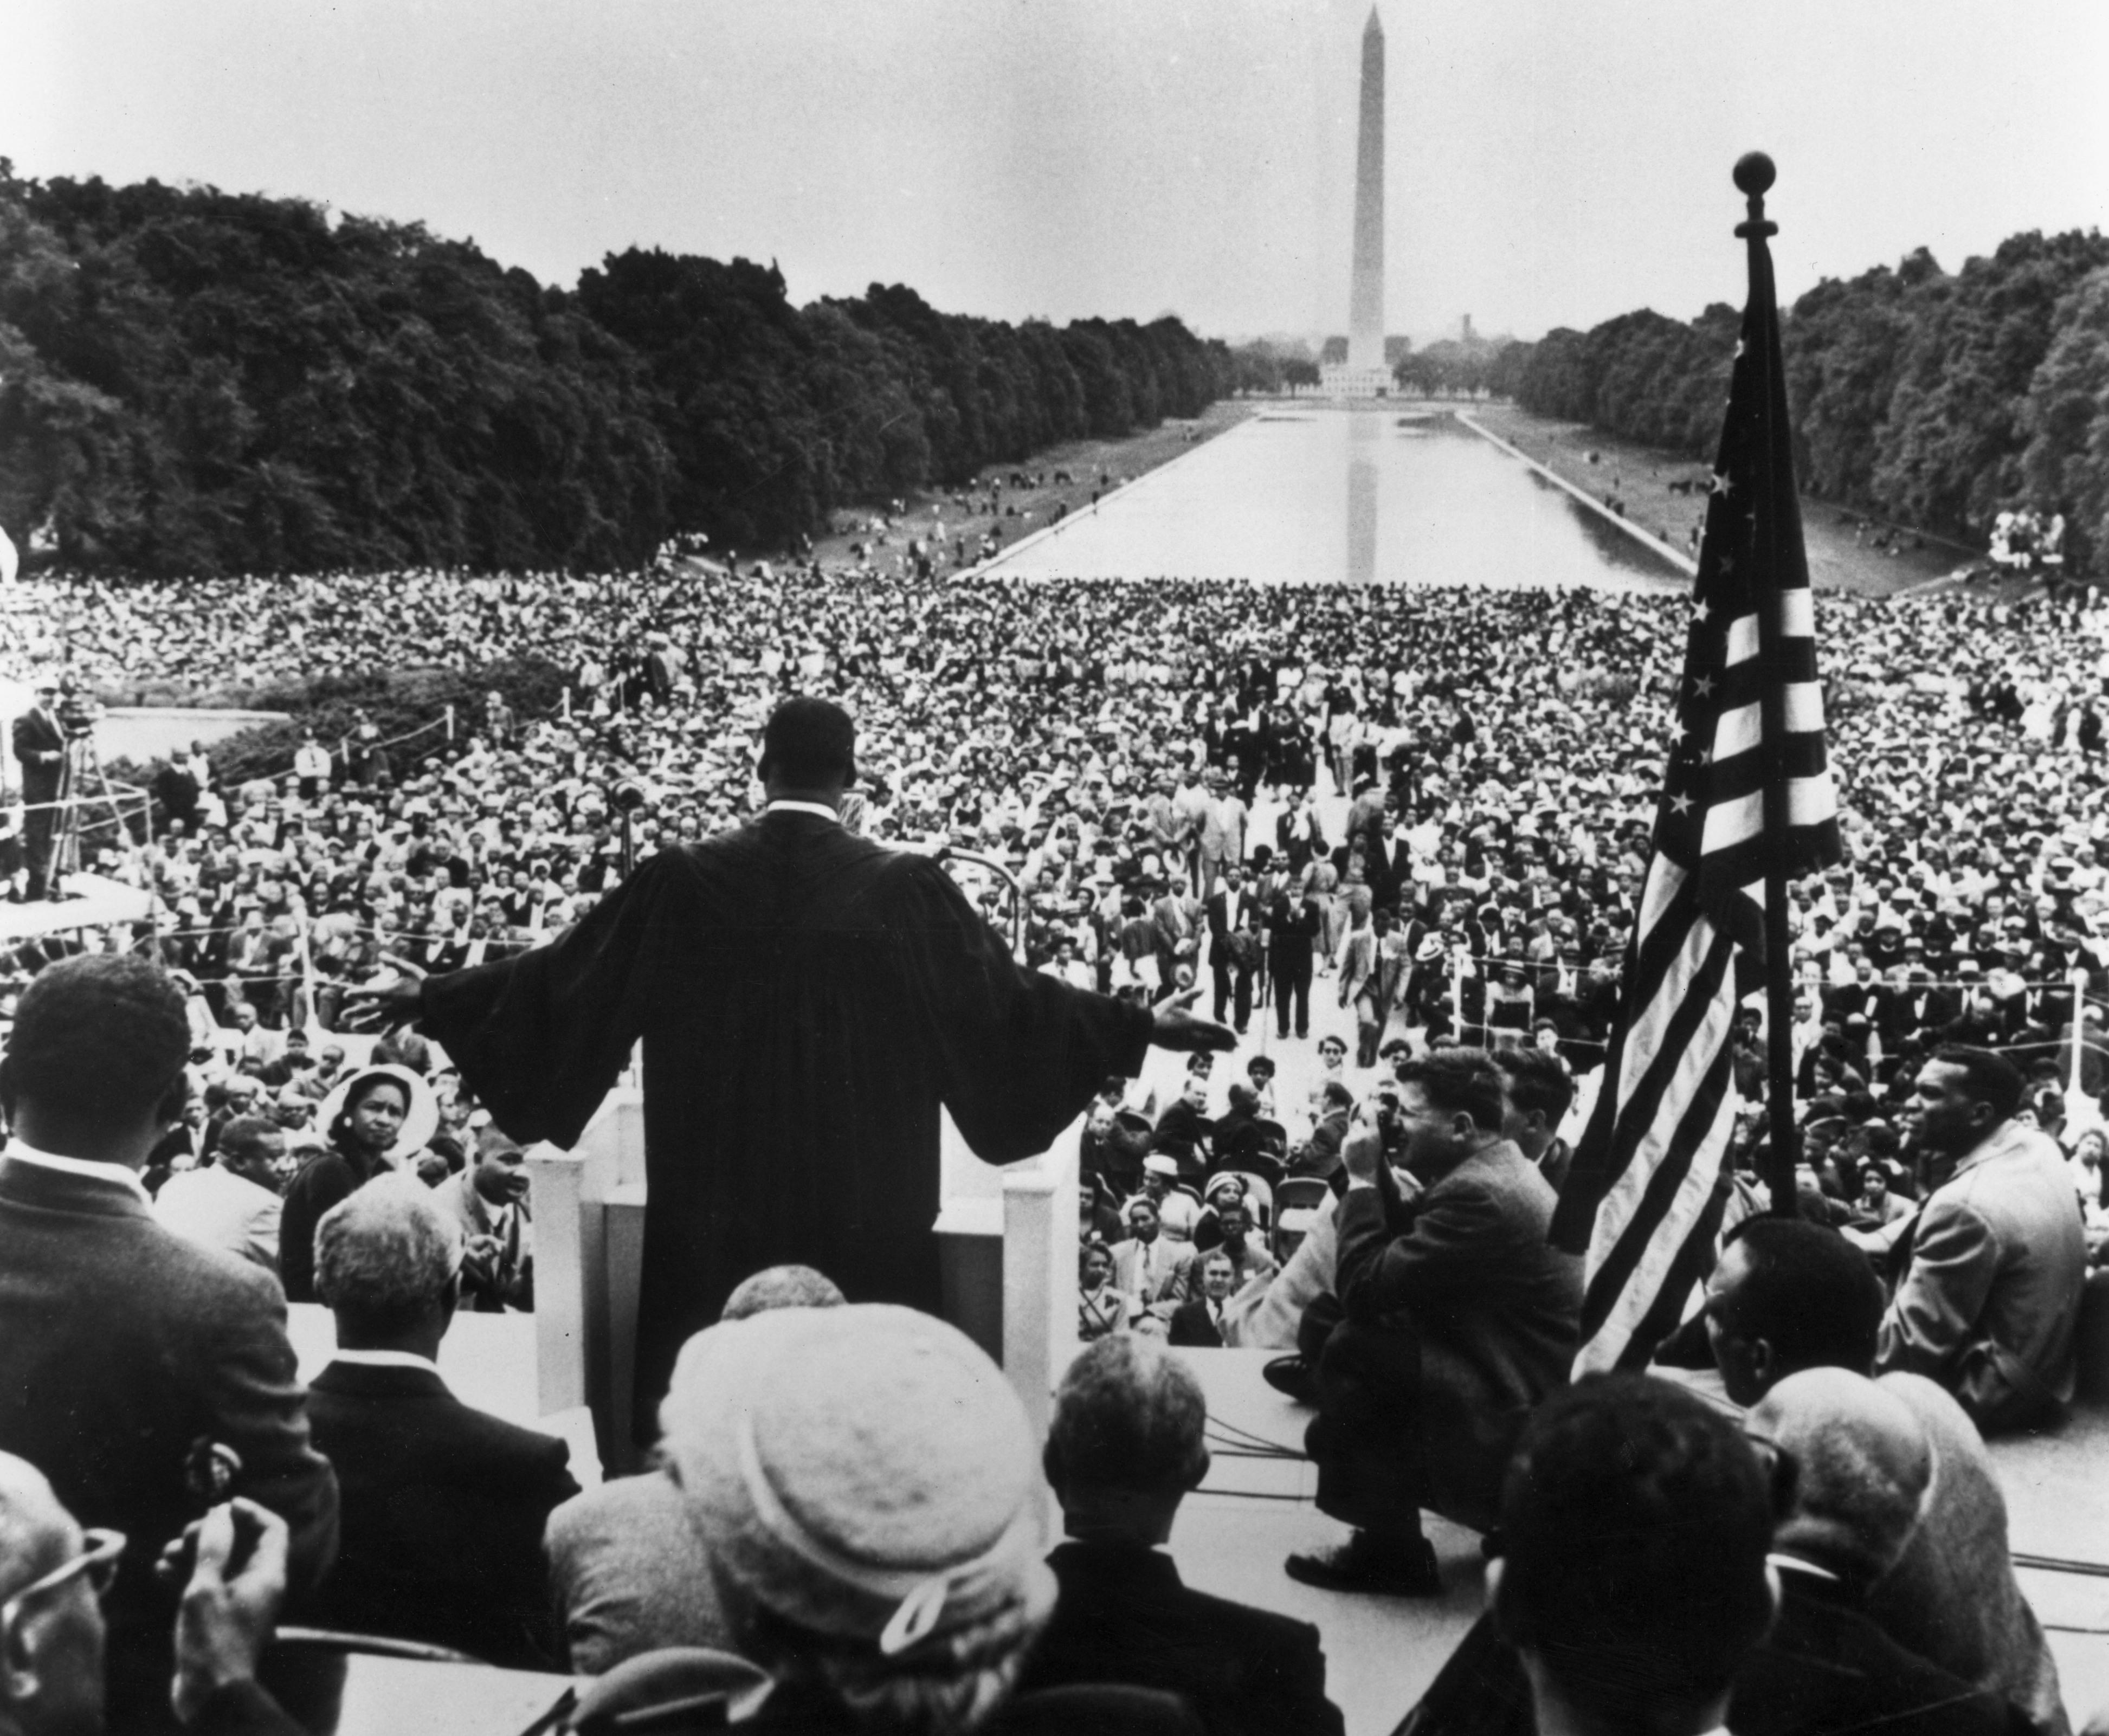 Martin Luther King, Jr. near the Reflecting Pool on May 17, 1957.